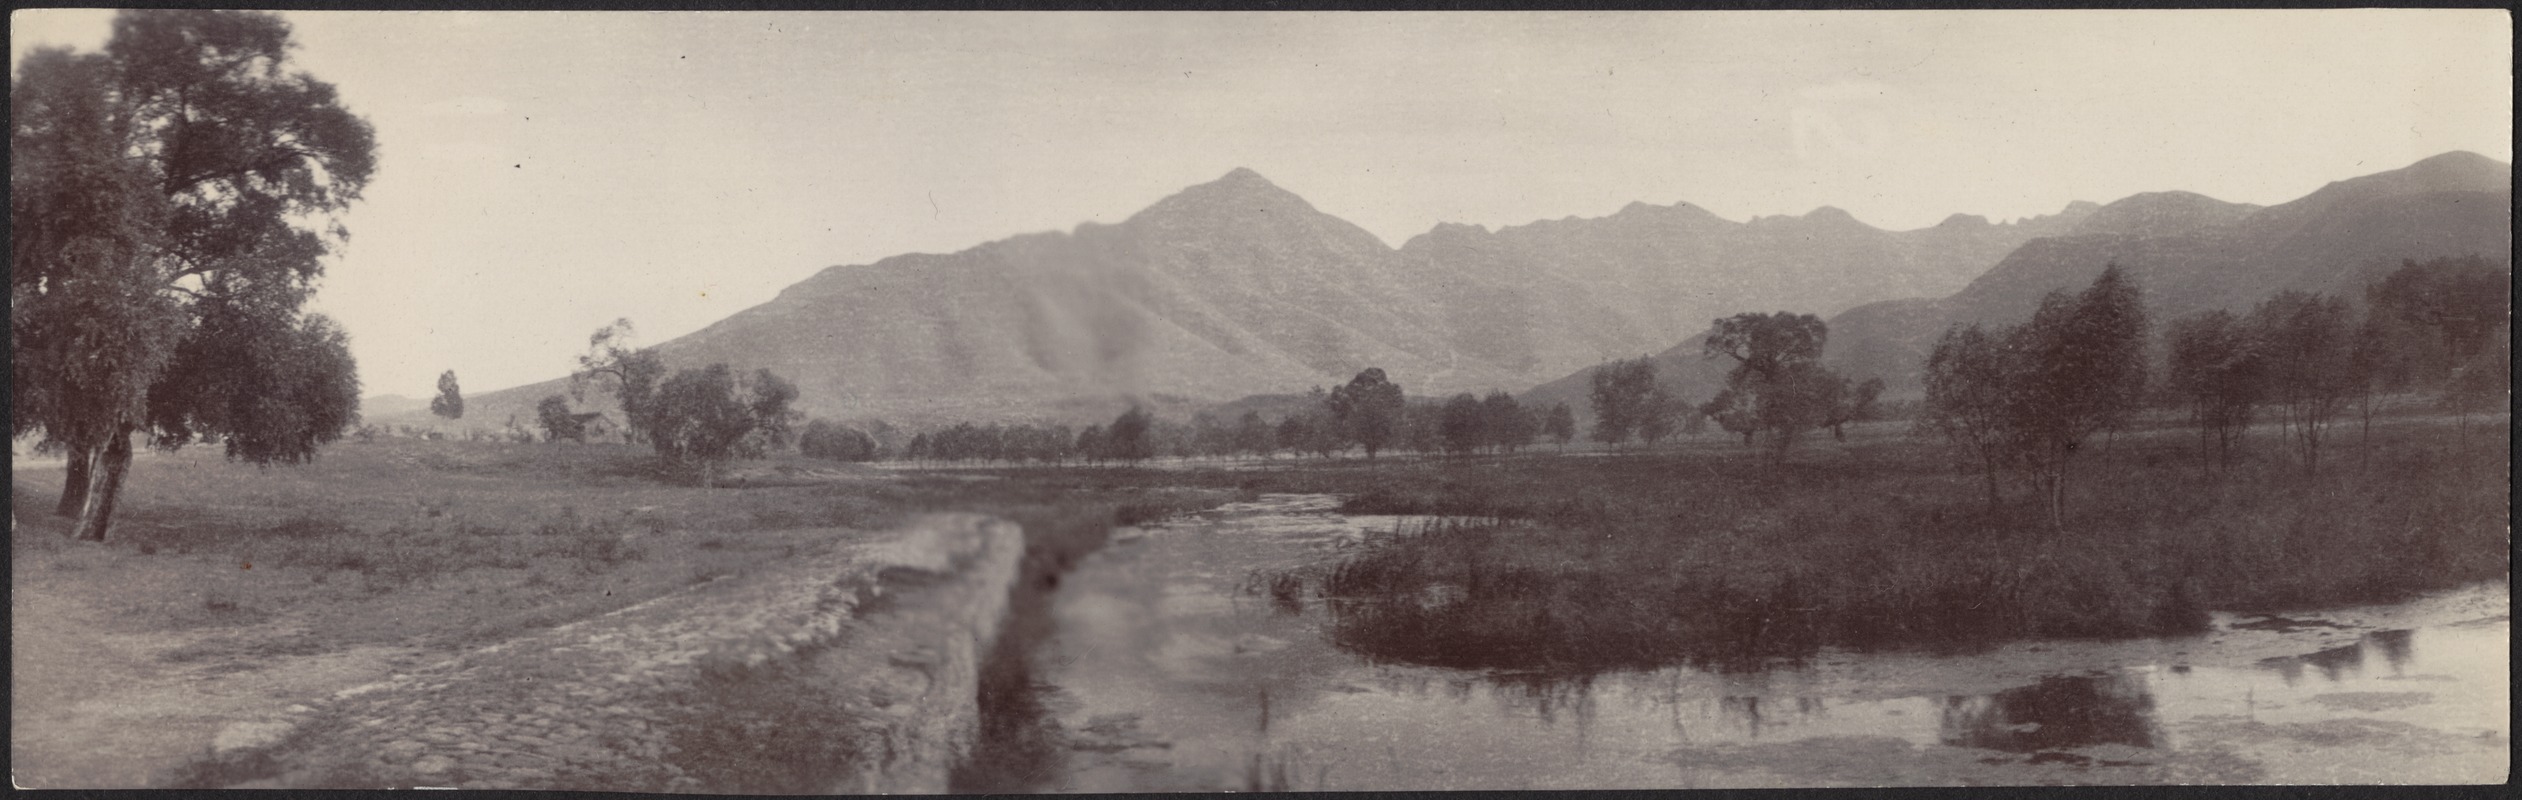 Road by a river and field; mountains in distance